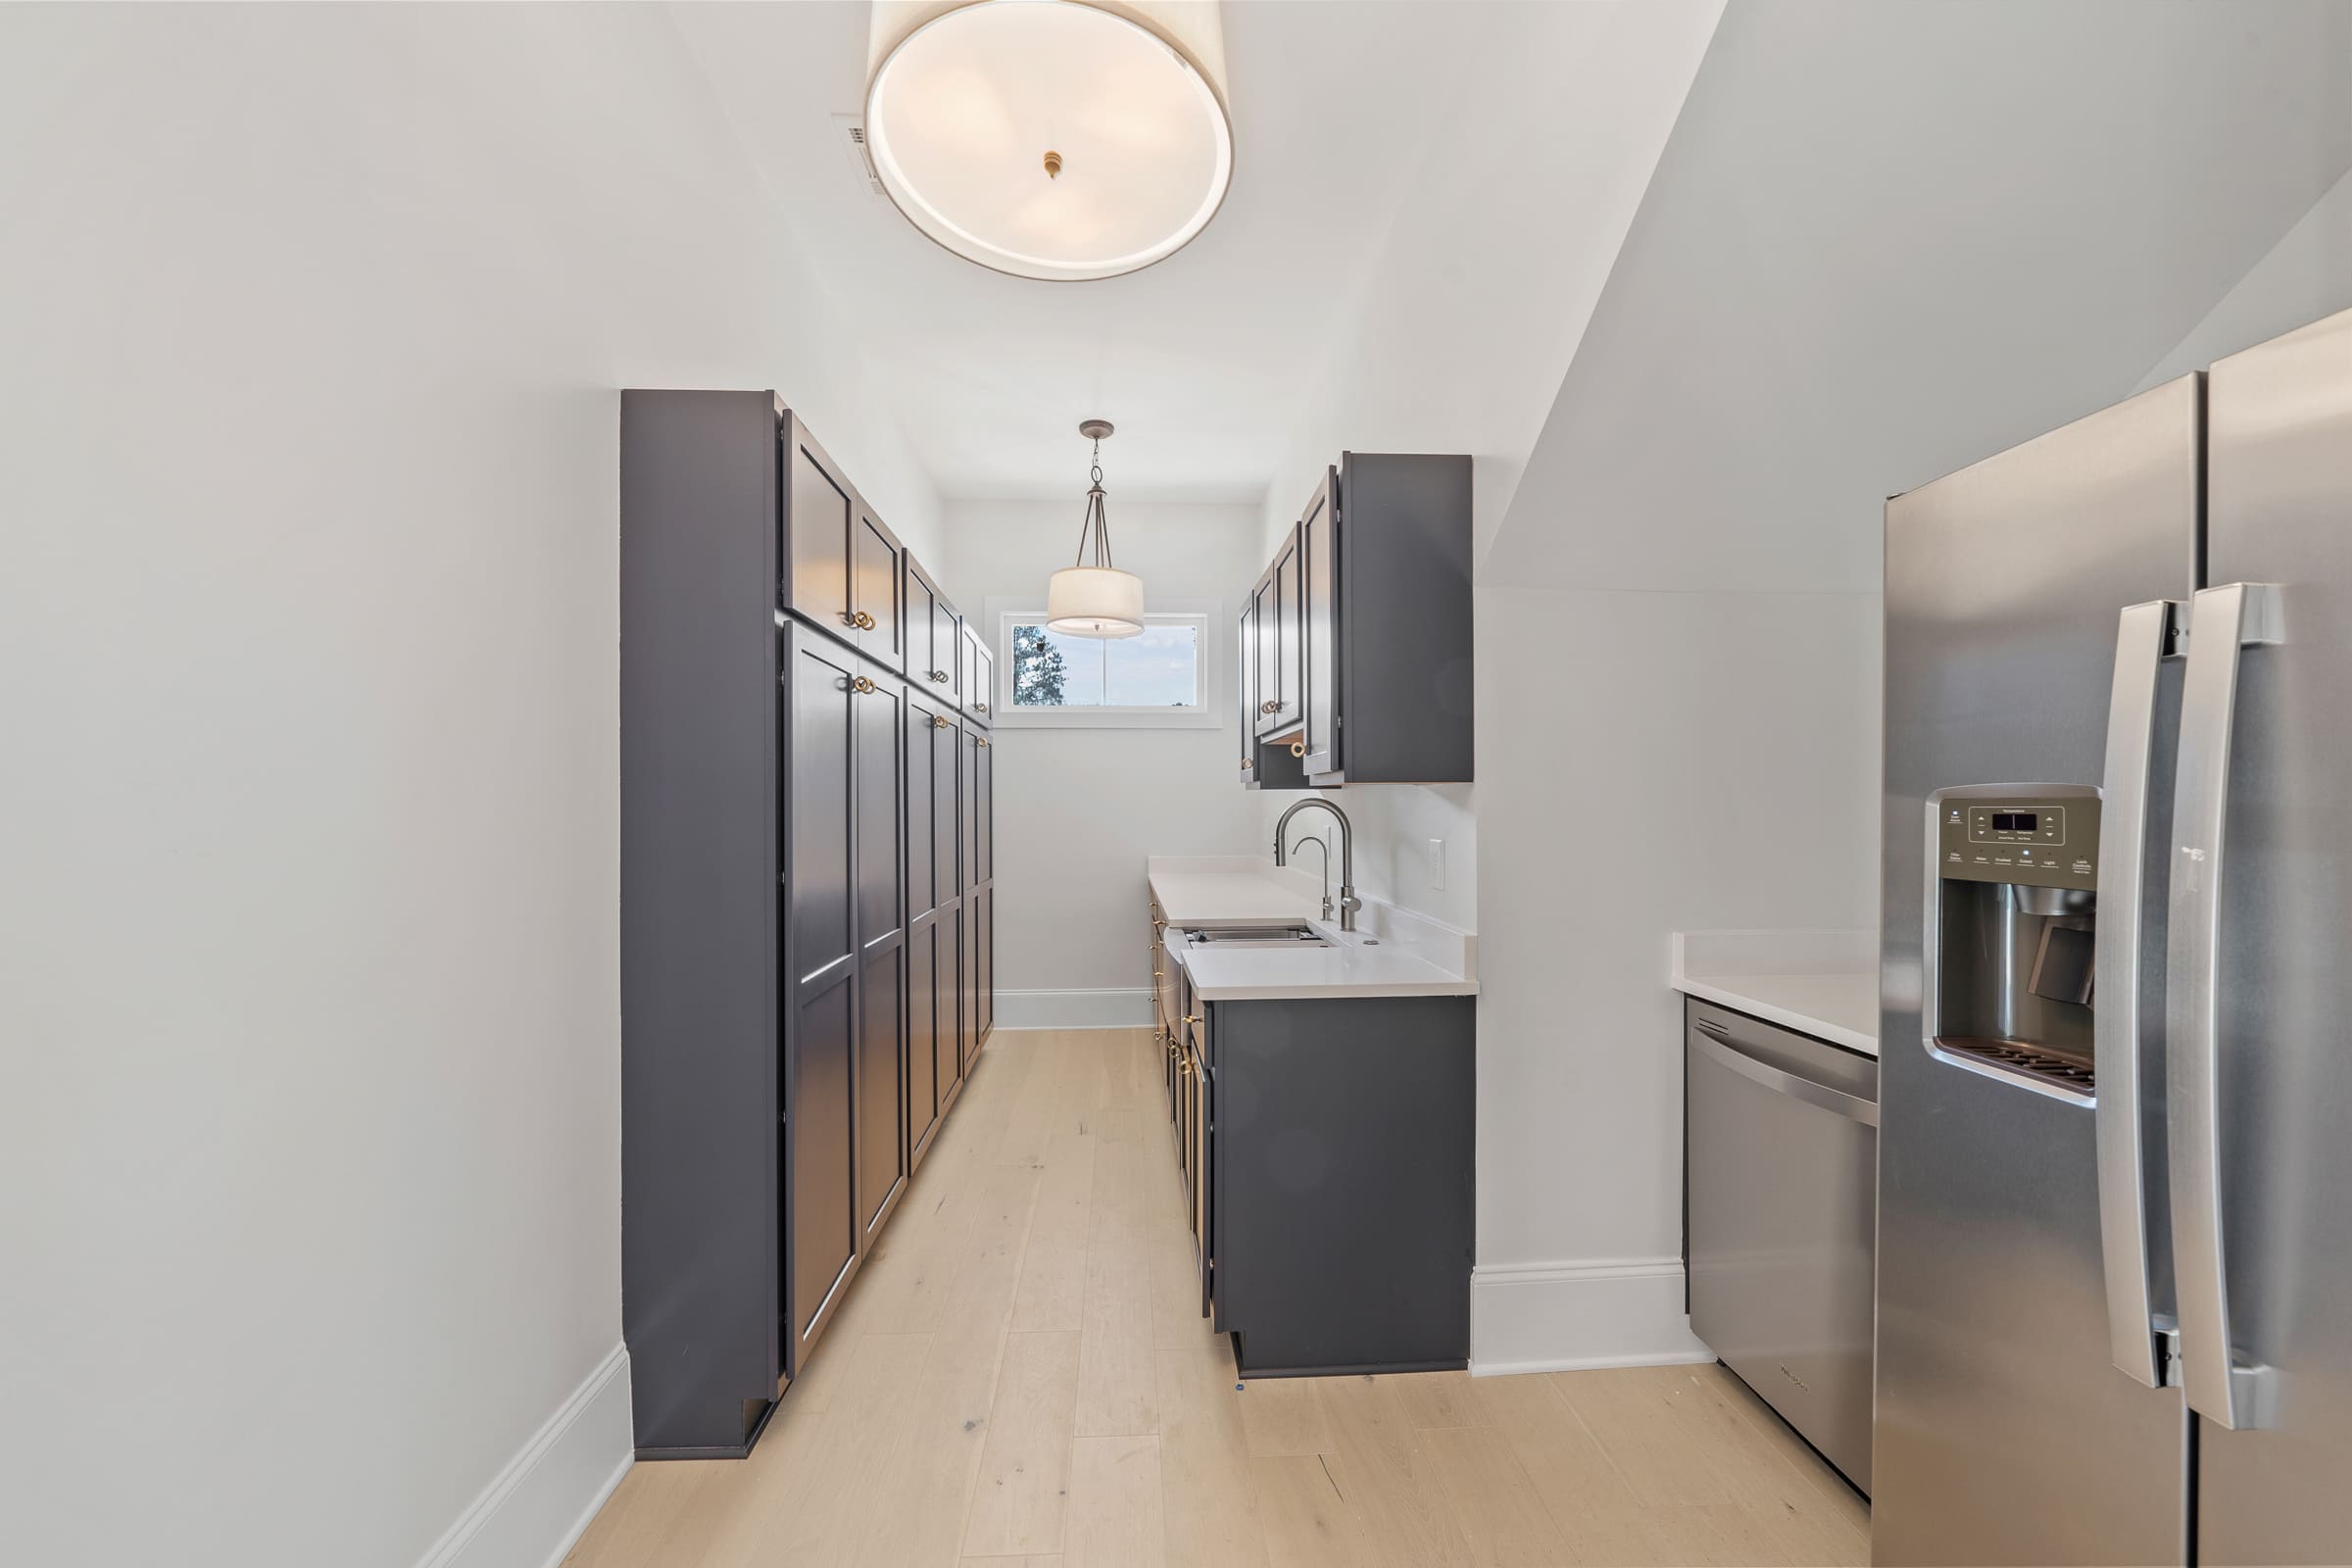 Walk-in Pantry with Dishwasher and Large Fridge |PAXISgroup